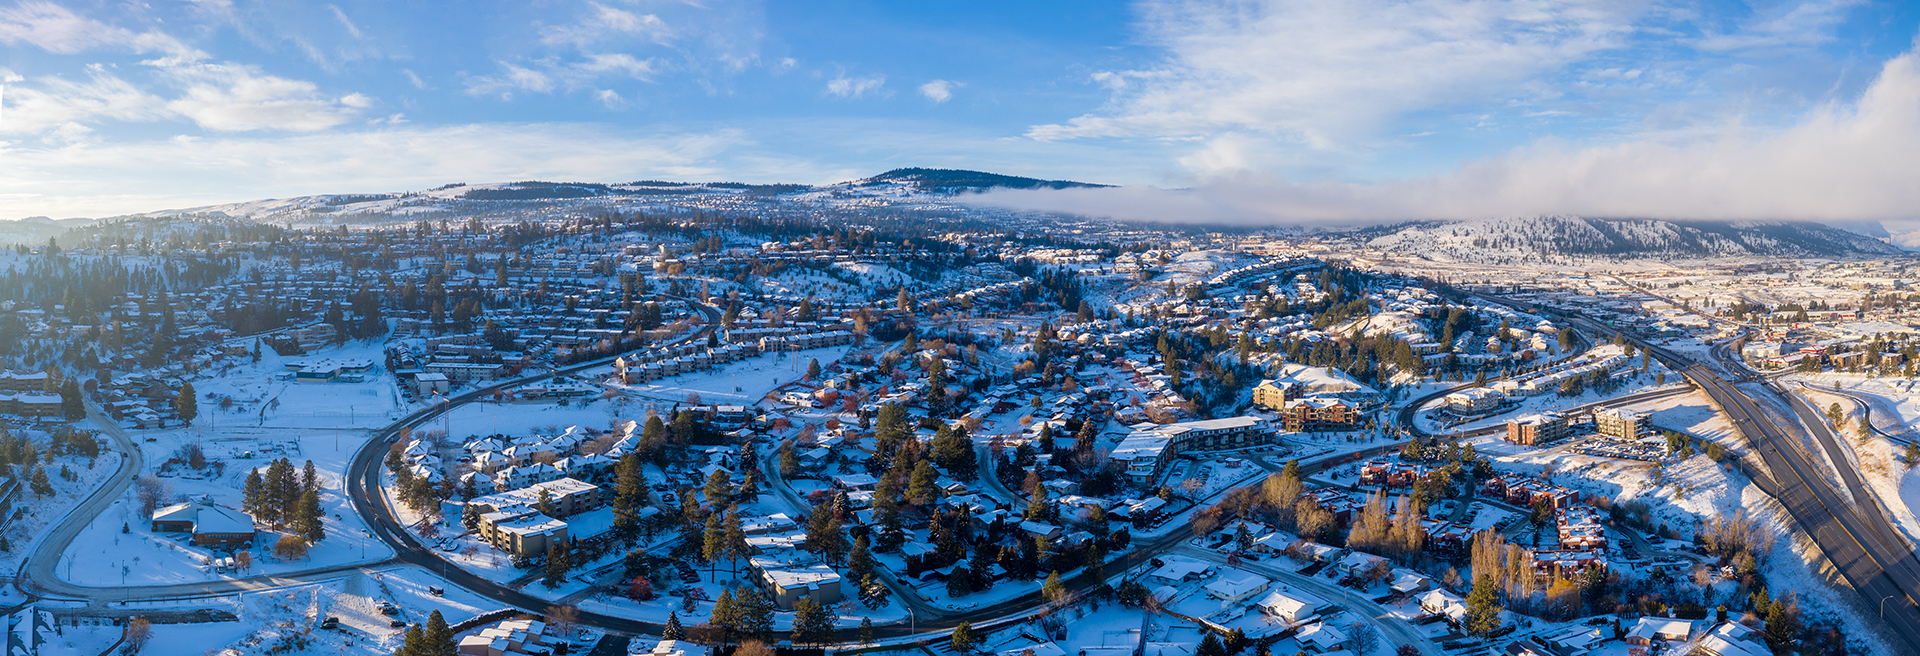 Kamloops City Aerial view of mountains and snow wide angle panoramic